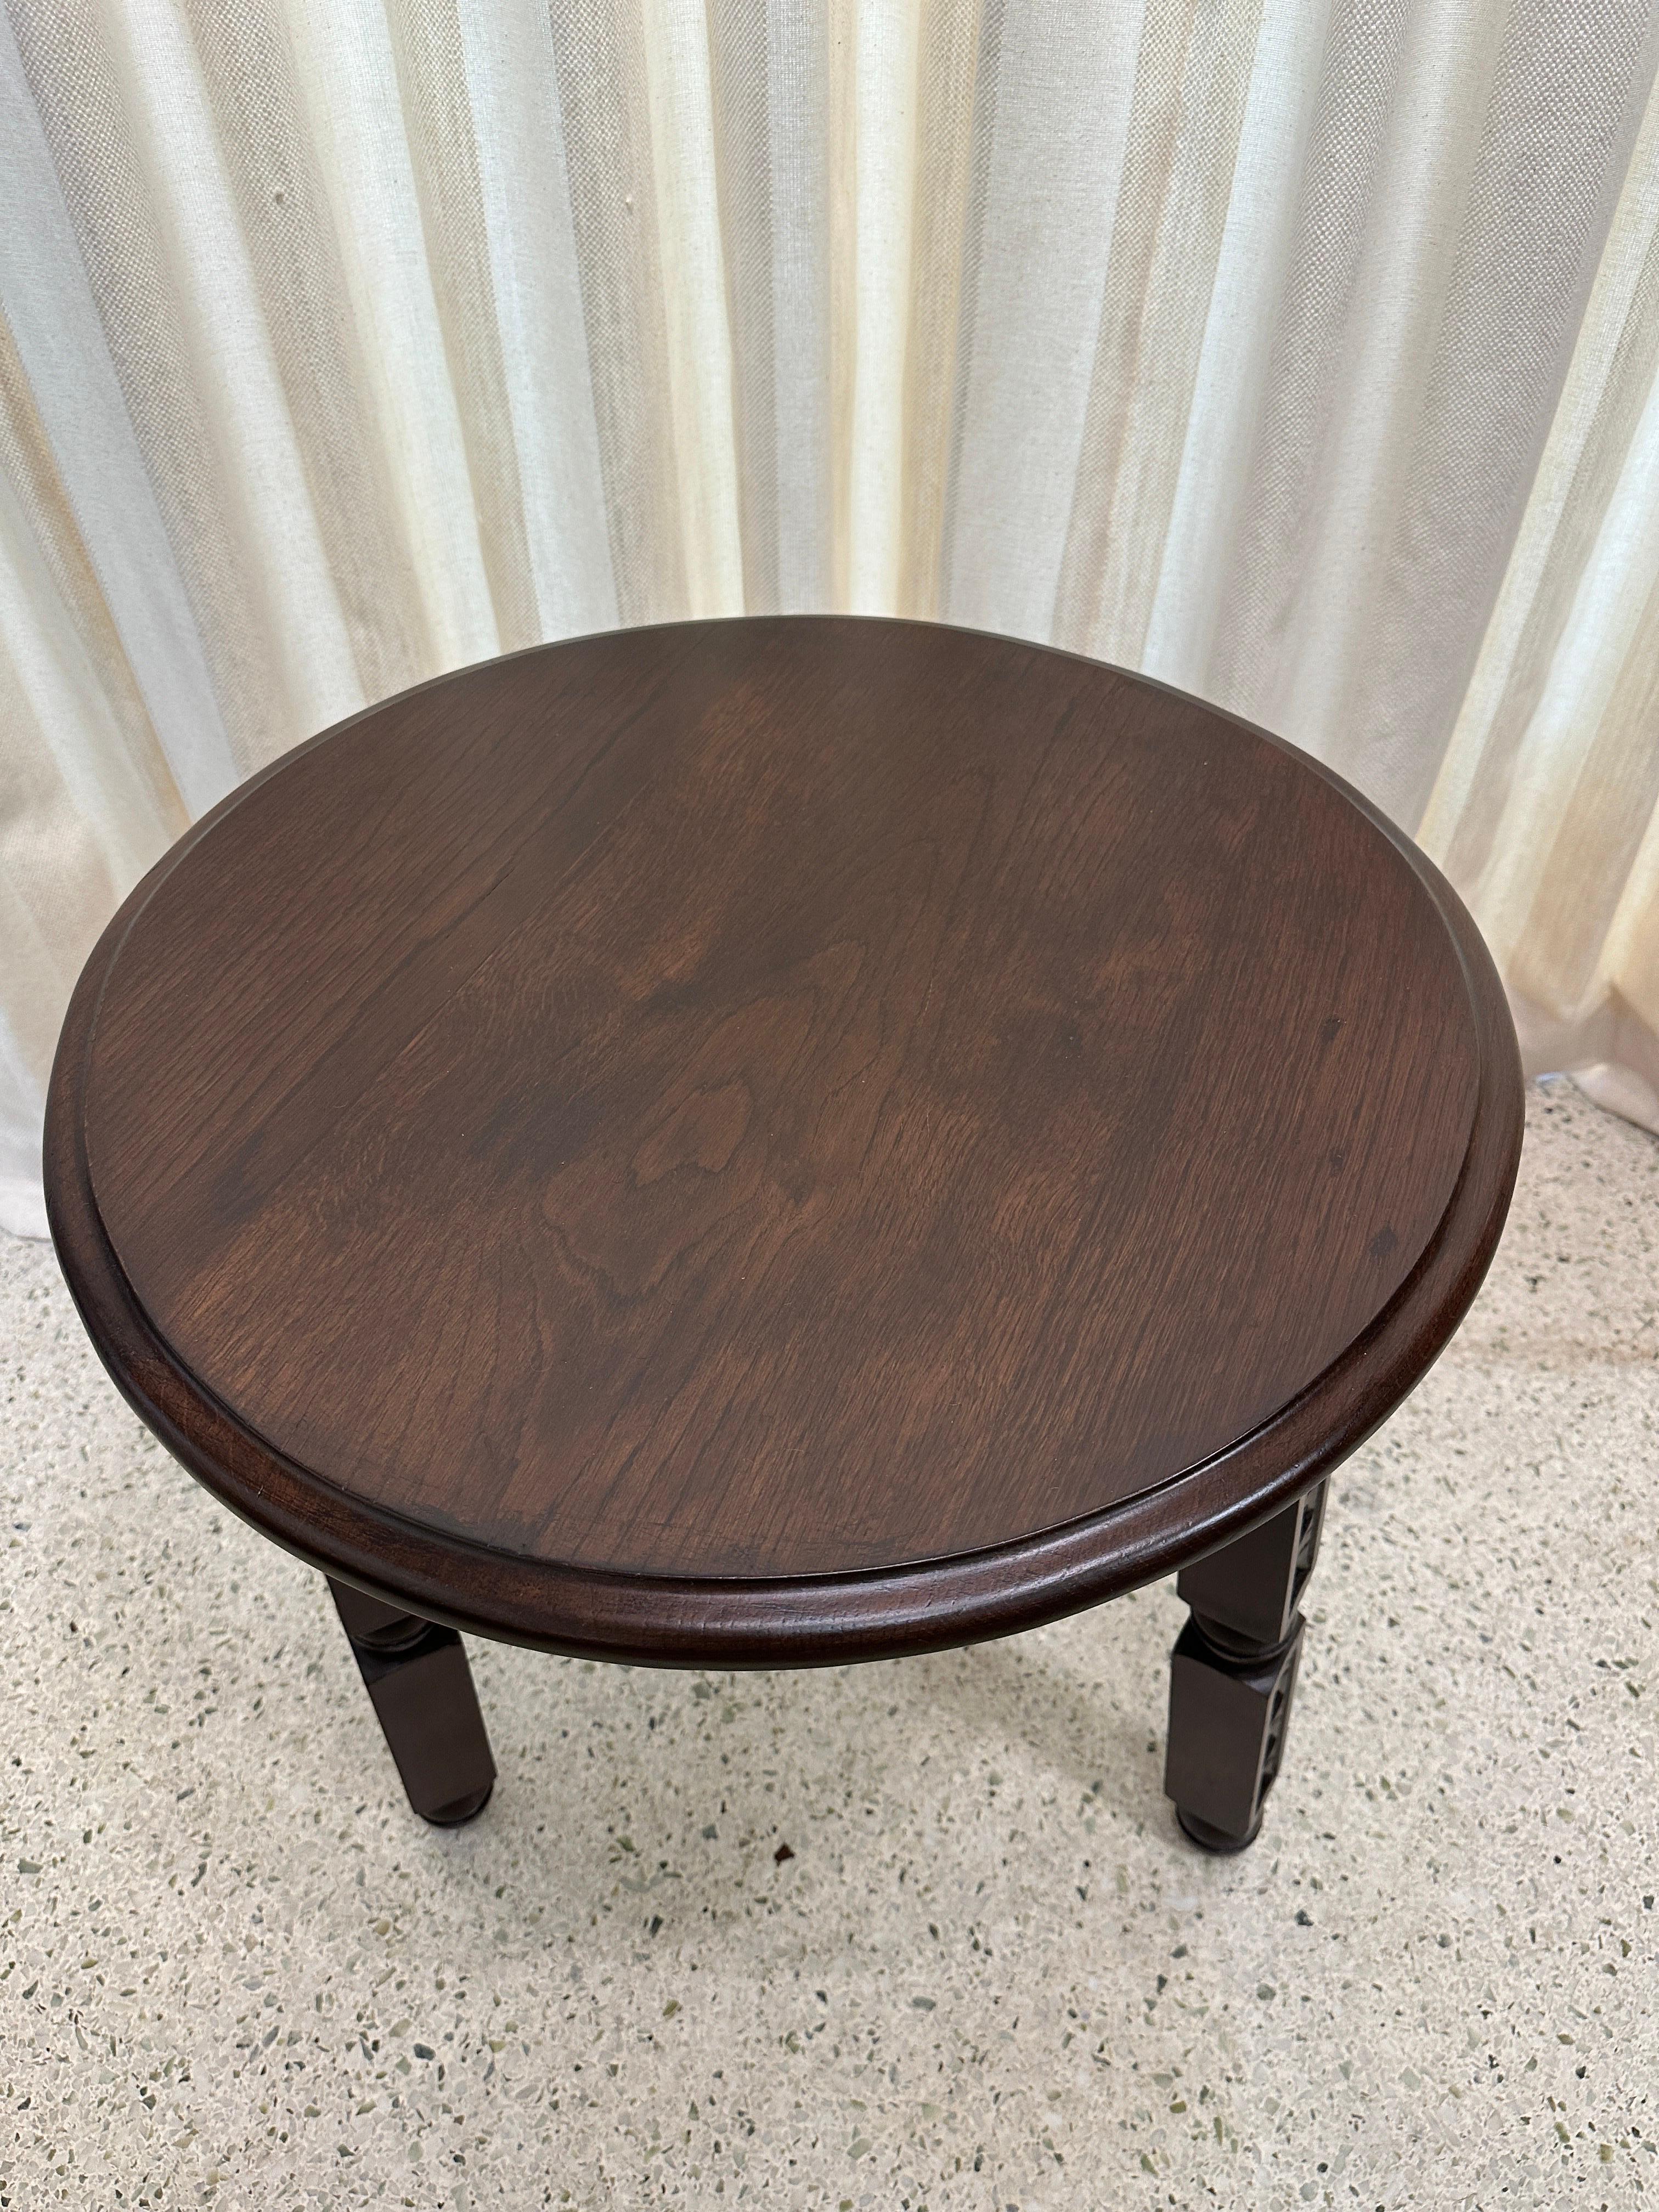 French 40's beautiful round oak side table with rush apron decorative detail by Charles Duduoyt.  Tri-Legged and carved wood decorative details.  Highlight is the original painted accents to rush weaving around the table in red and green.   NOTE: